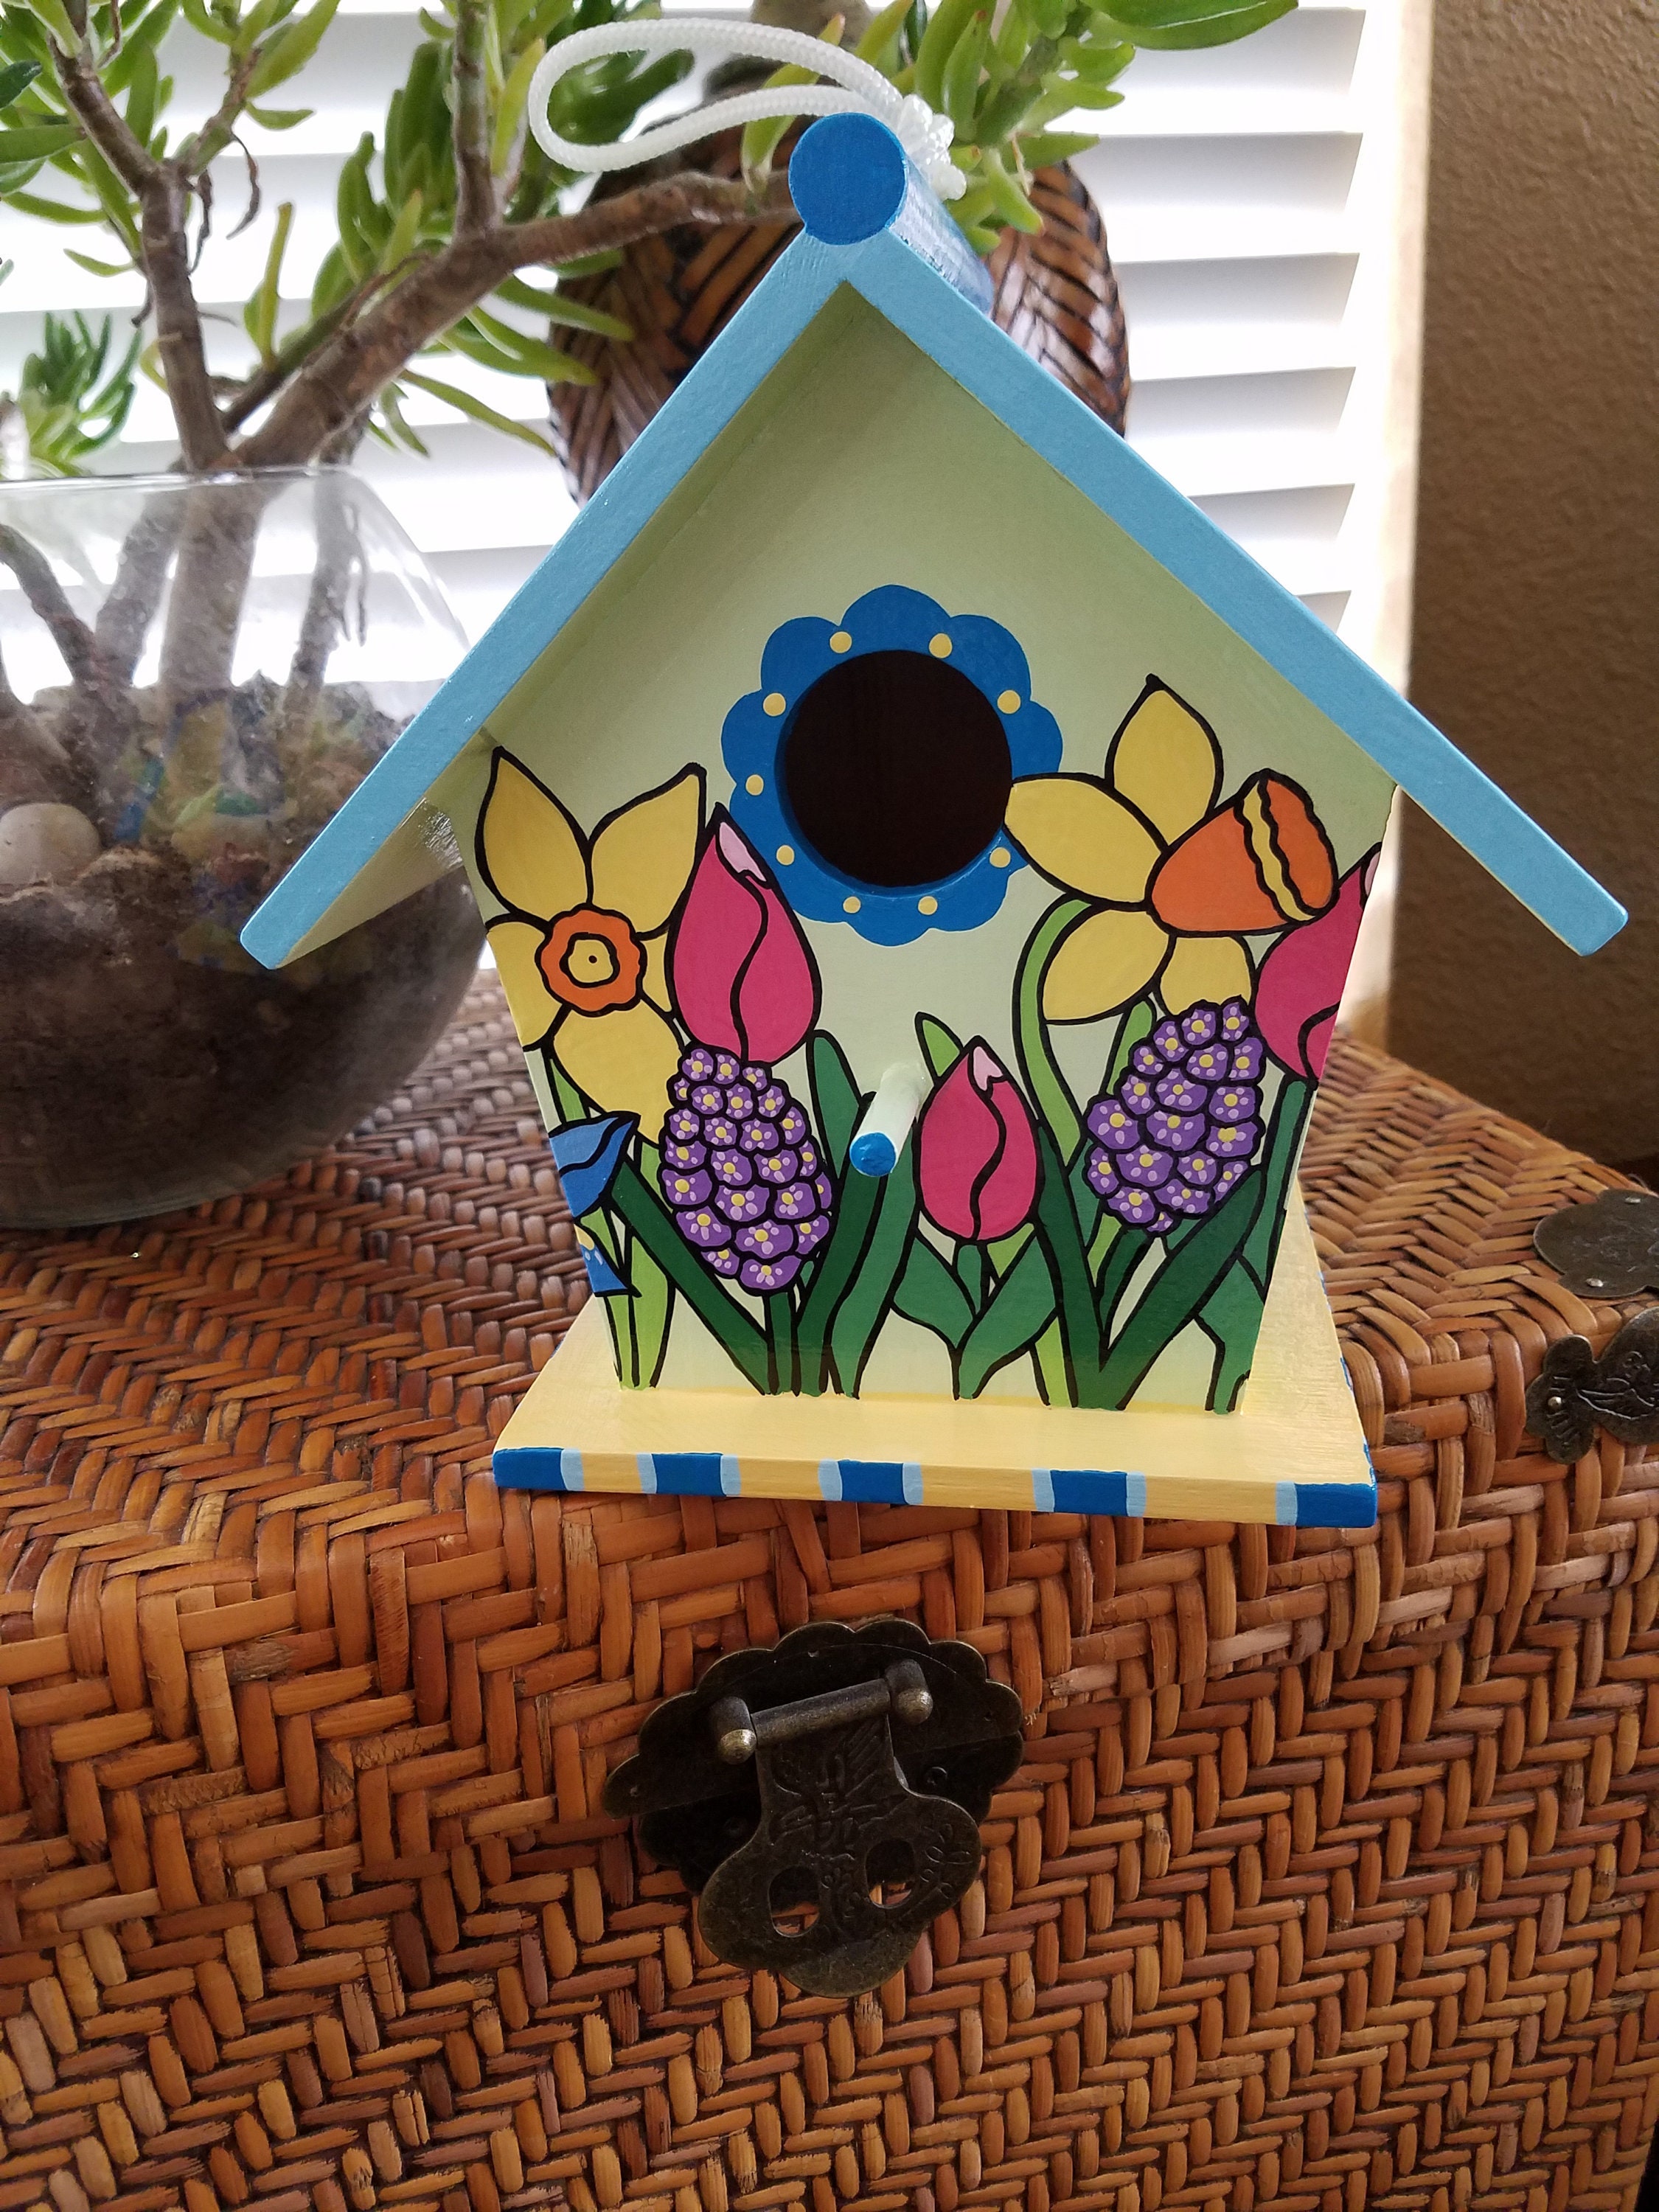 Kid DIY Wooden Bird House Paint and Decorate Arts Crafts DIY Bird House Kit  - China Bird House and Wooden Bird House price